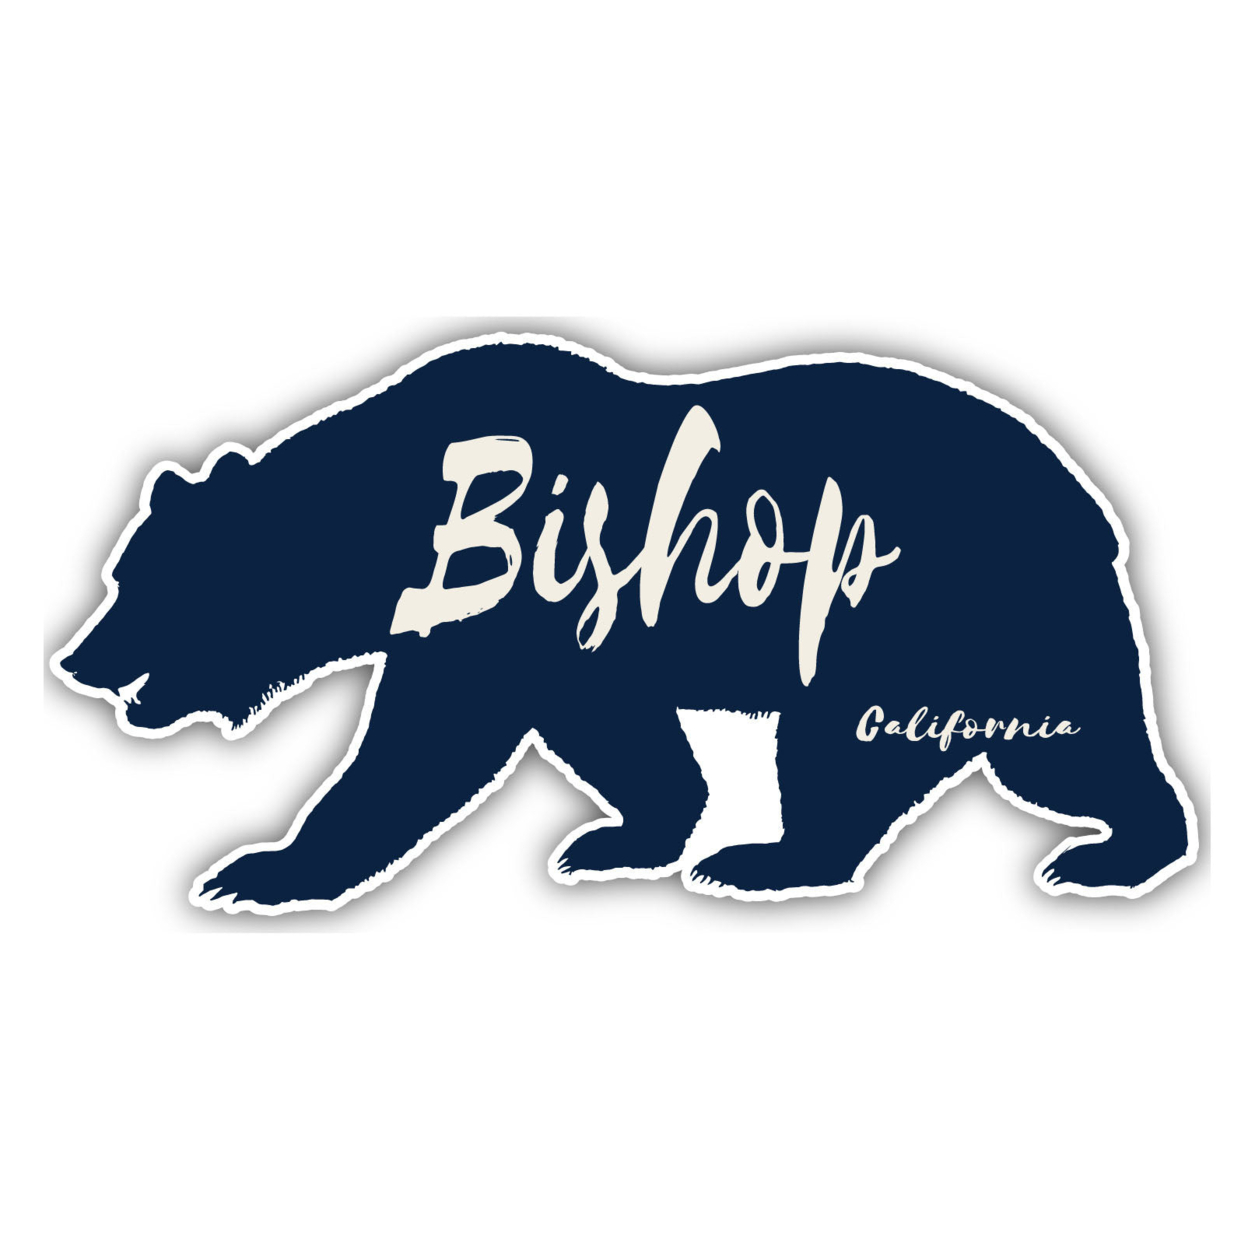 Bishop California Souvenir Decorative Stickers (Choose Theme And Size) - 4-Pack, 12-Inch, Bear